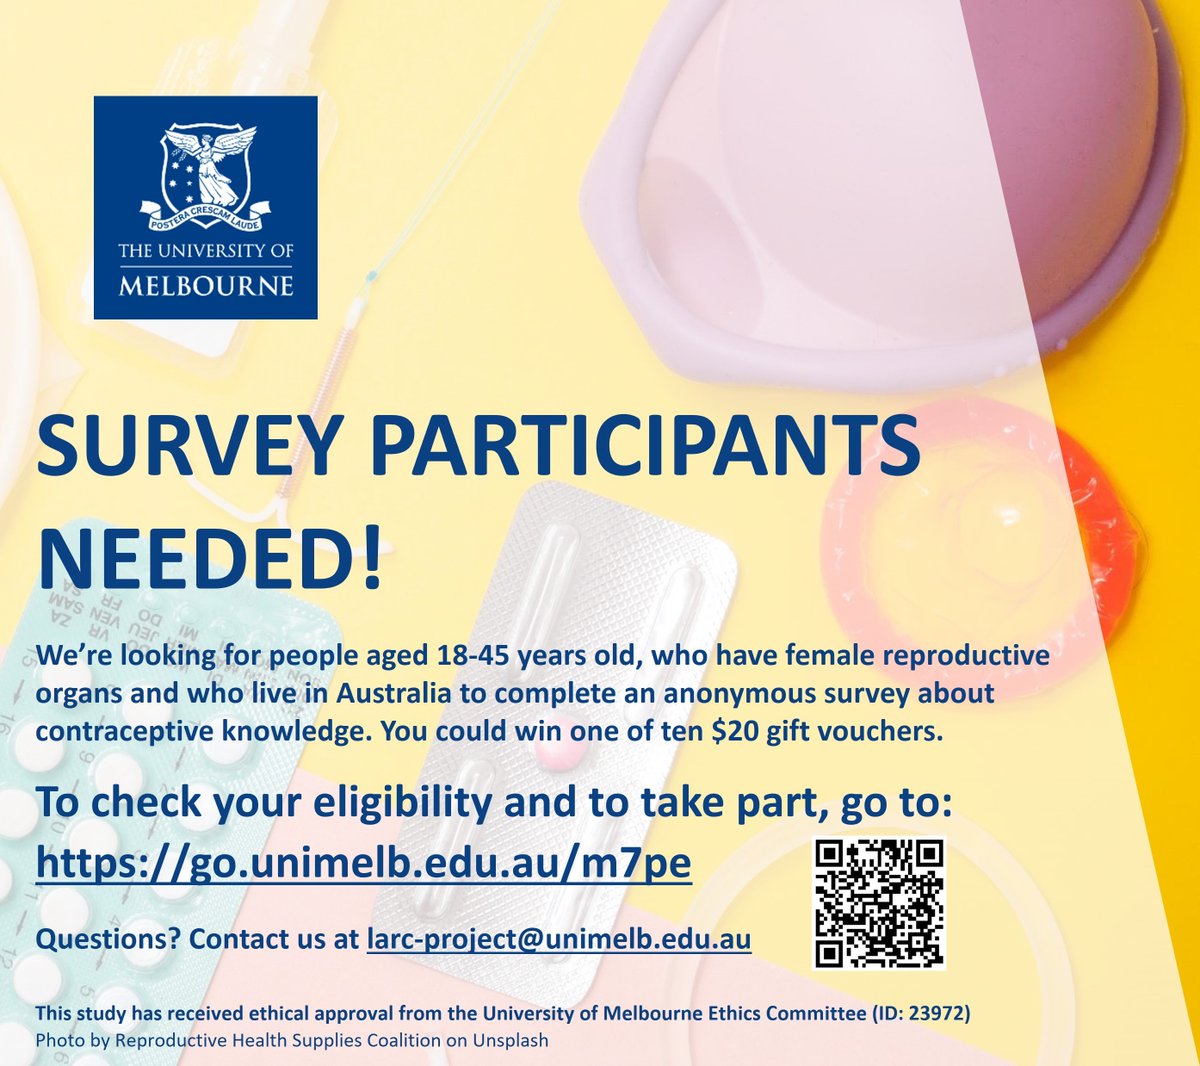 Survey participants needed! We're looking for people aged 18-45 years old, who have female reproductive organs and who live in Australia to complete a survey about contraceptive knowledge. Access the survey here: go.unimelb.edu.au/m7pe